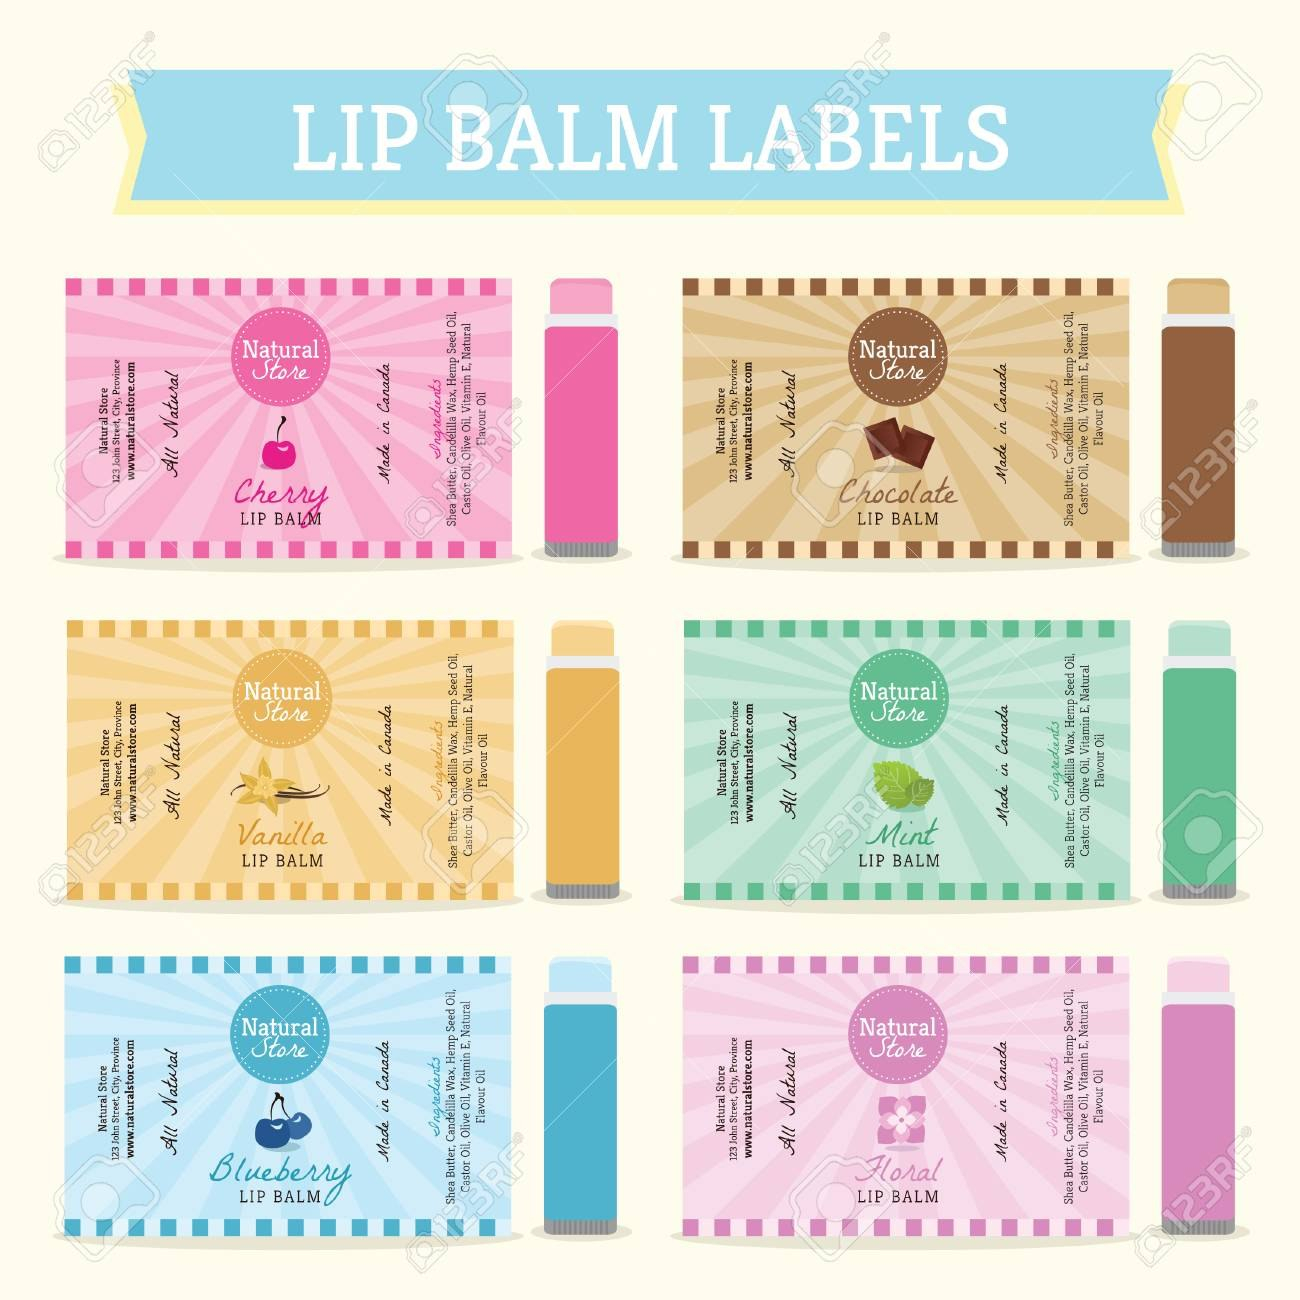 Lip Balm Labels Template Set Vector Illustration pertaining to Lip Balm Label Template